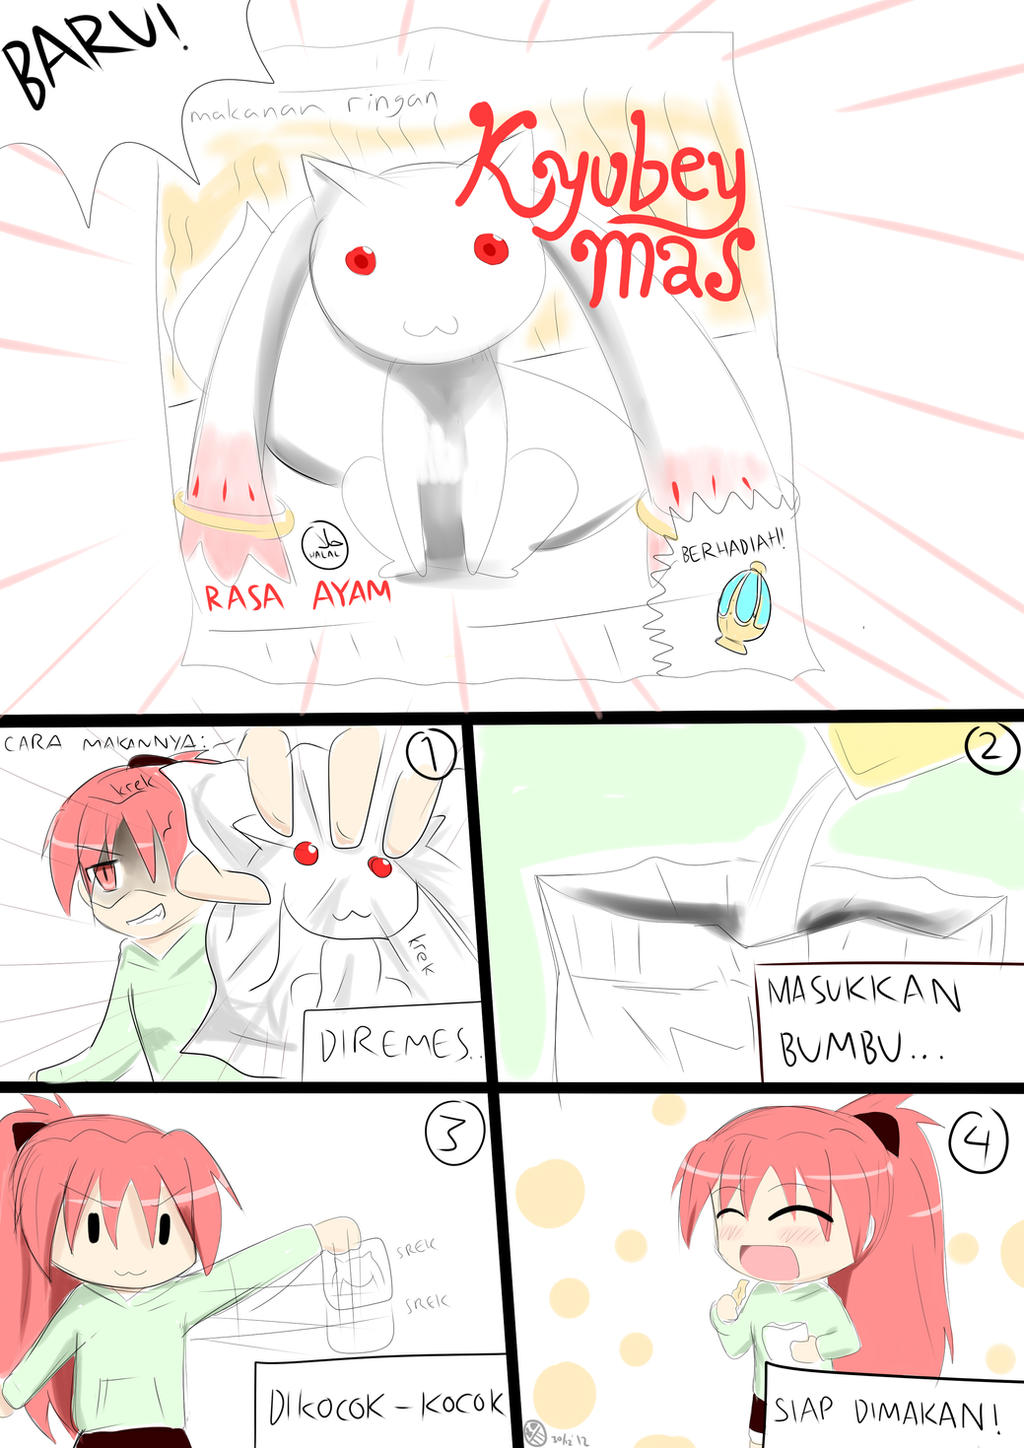  - mie_remes_cap_kyubey_mas_by_zerotheultradirector-d5prs8r